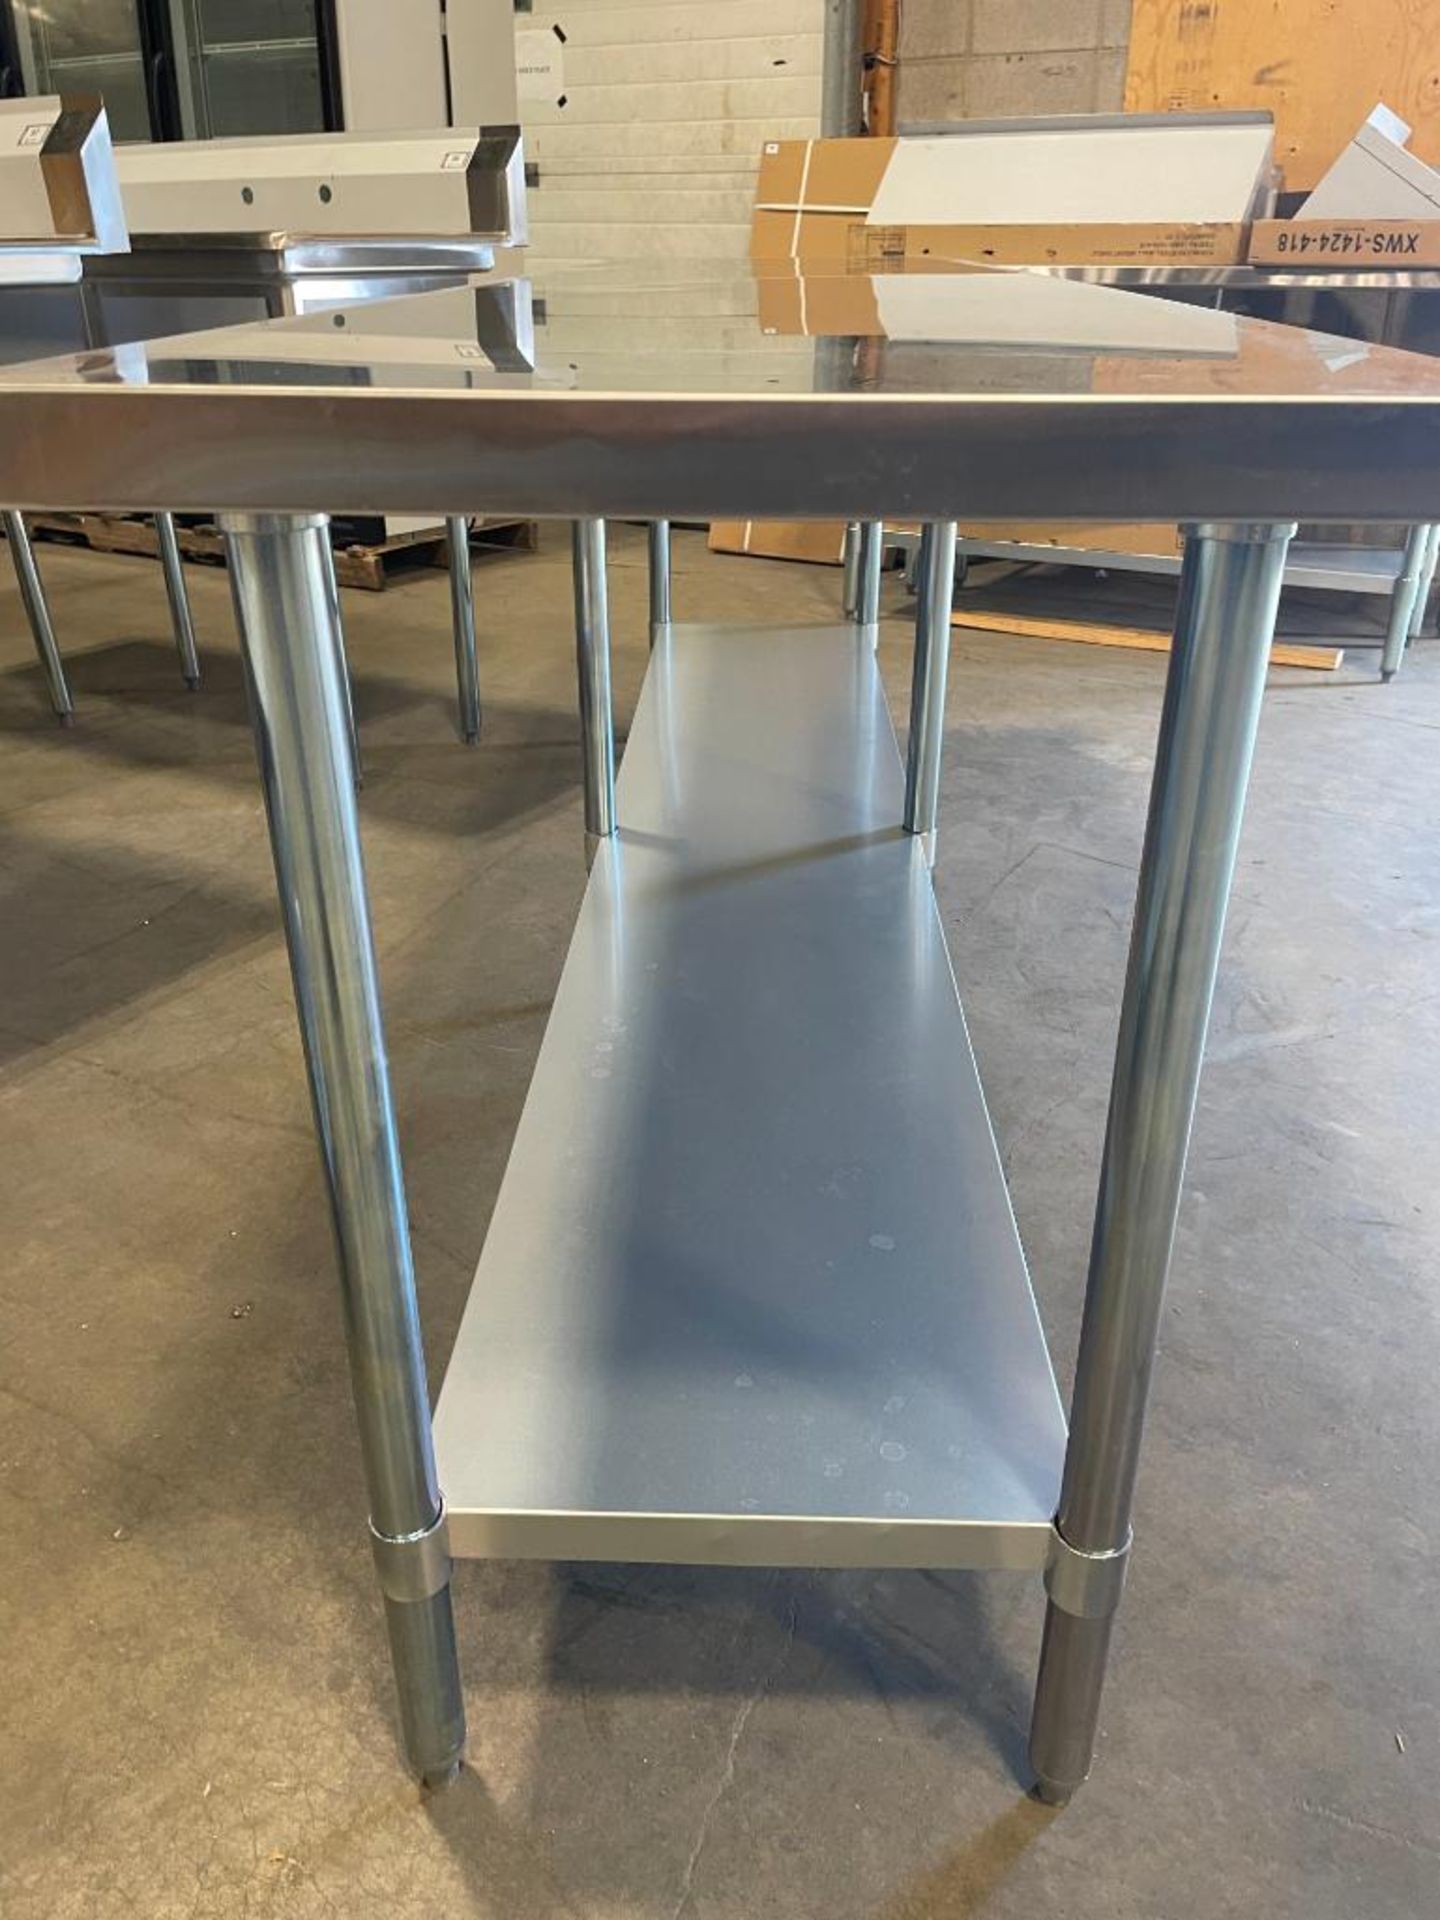 NEW 24" X 96" STAINLESS STEEL WORK TABLE WITH UNDERSHELF - Image 6 of 8